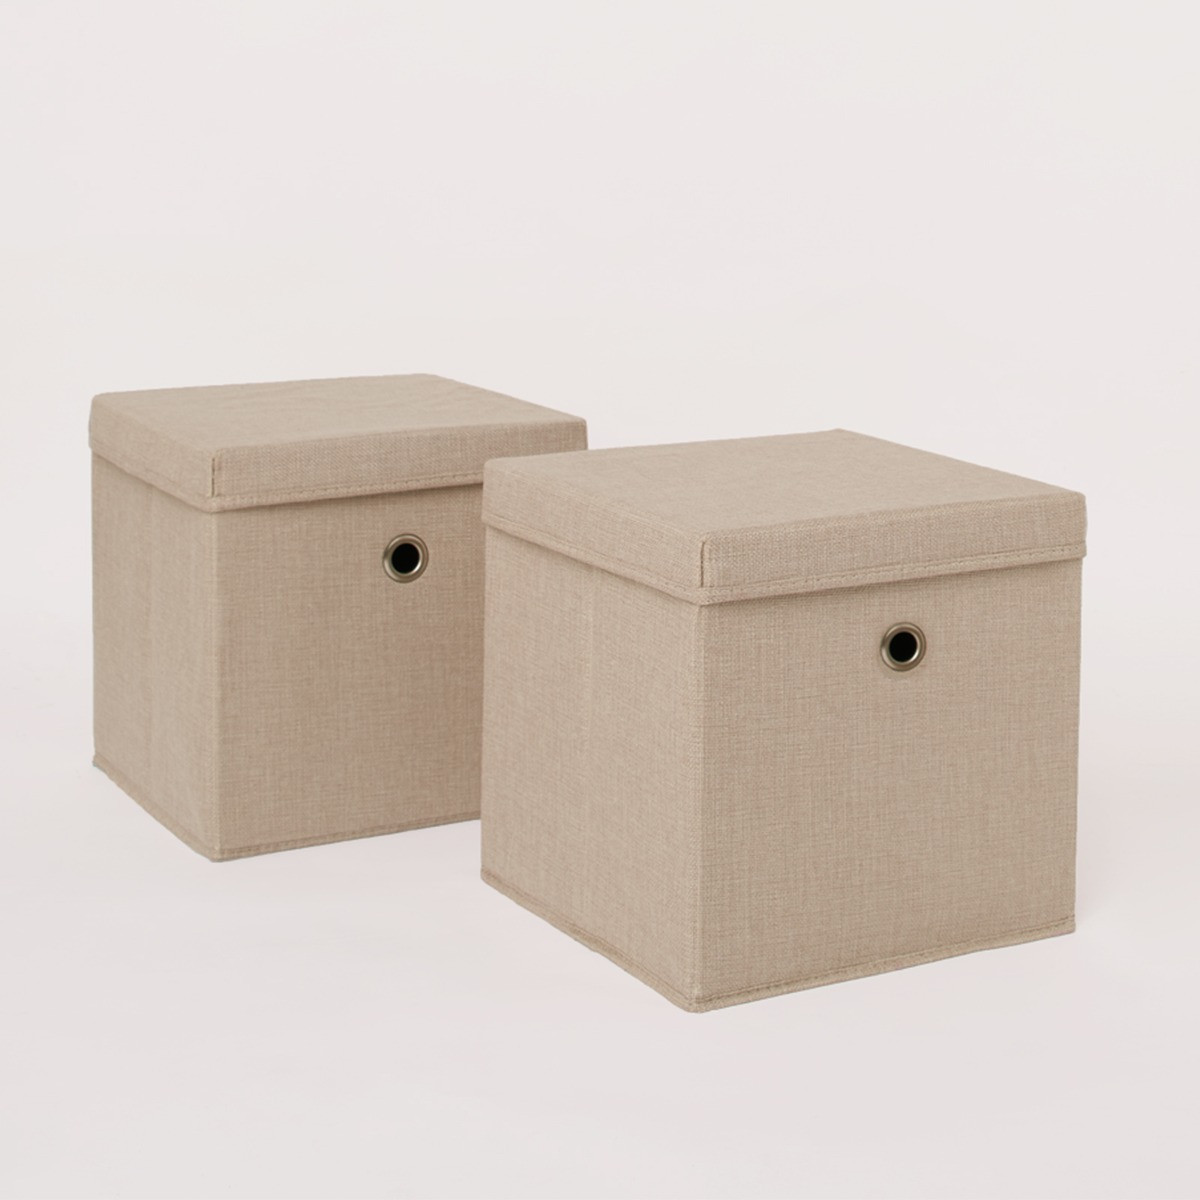 OHS Faux Linen Storage Box With Lid, Beige - 2 Pack>